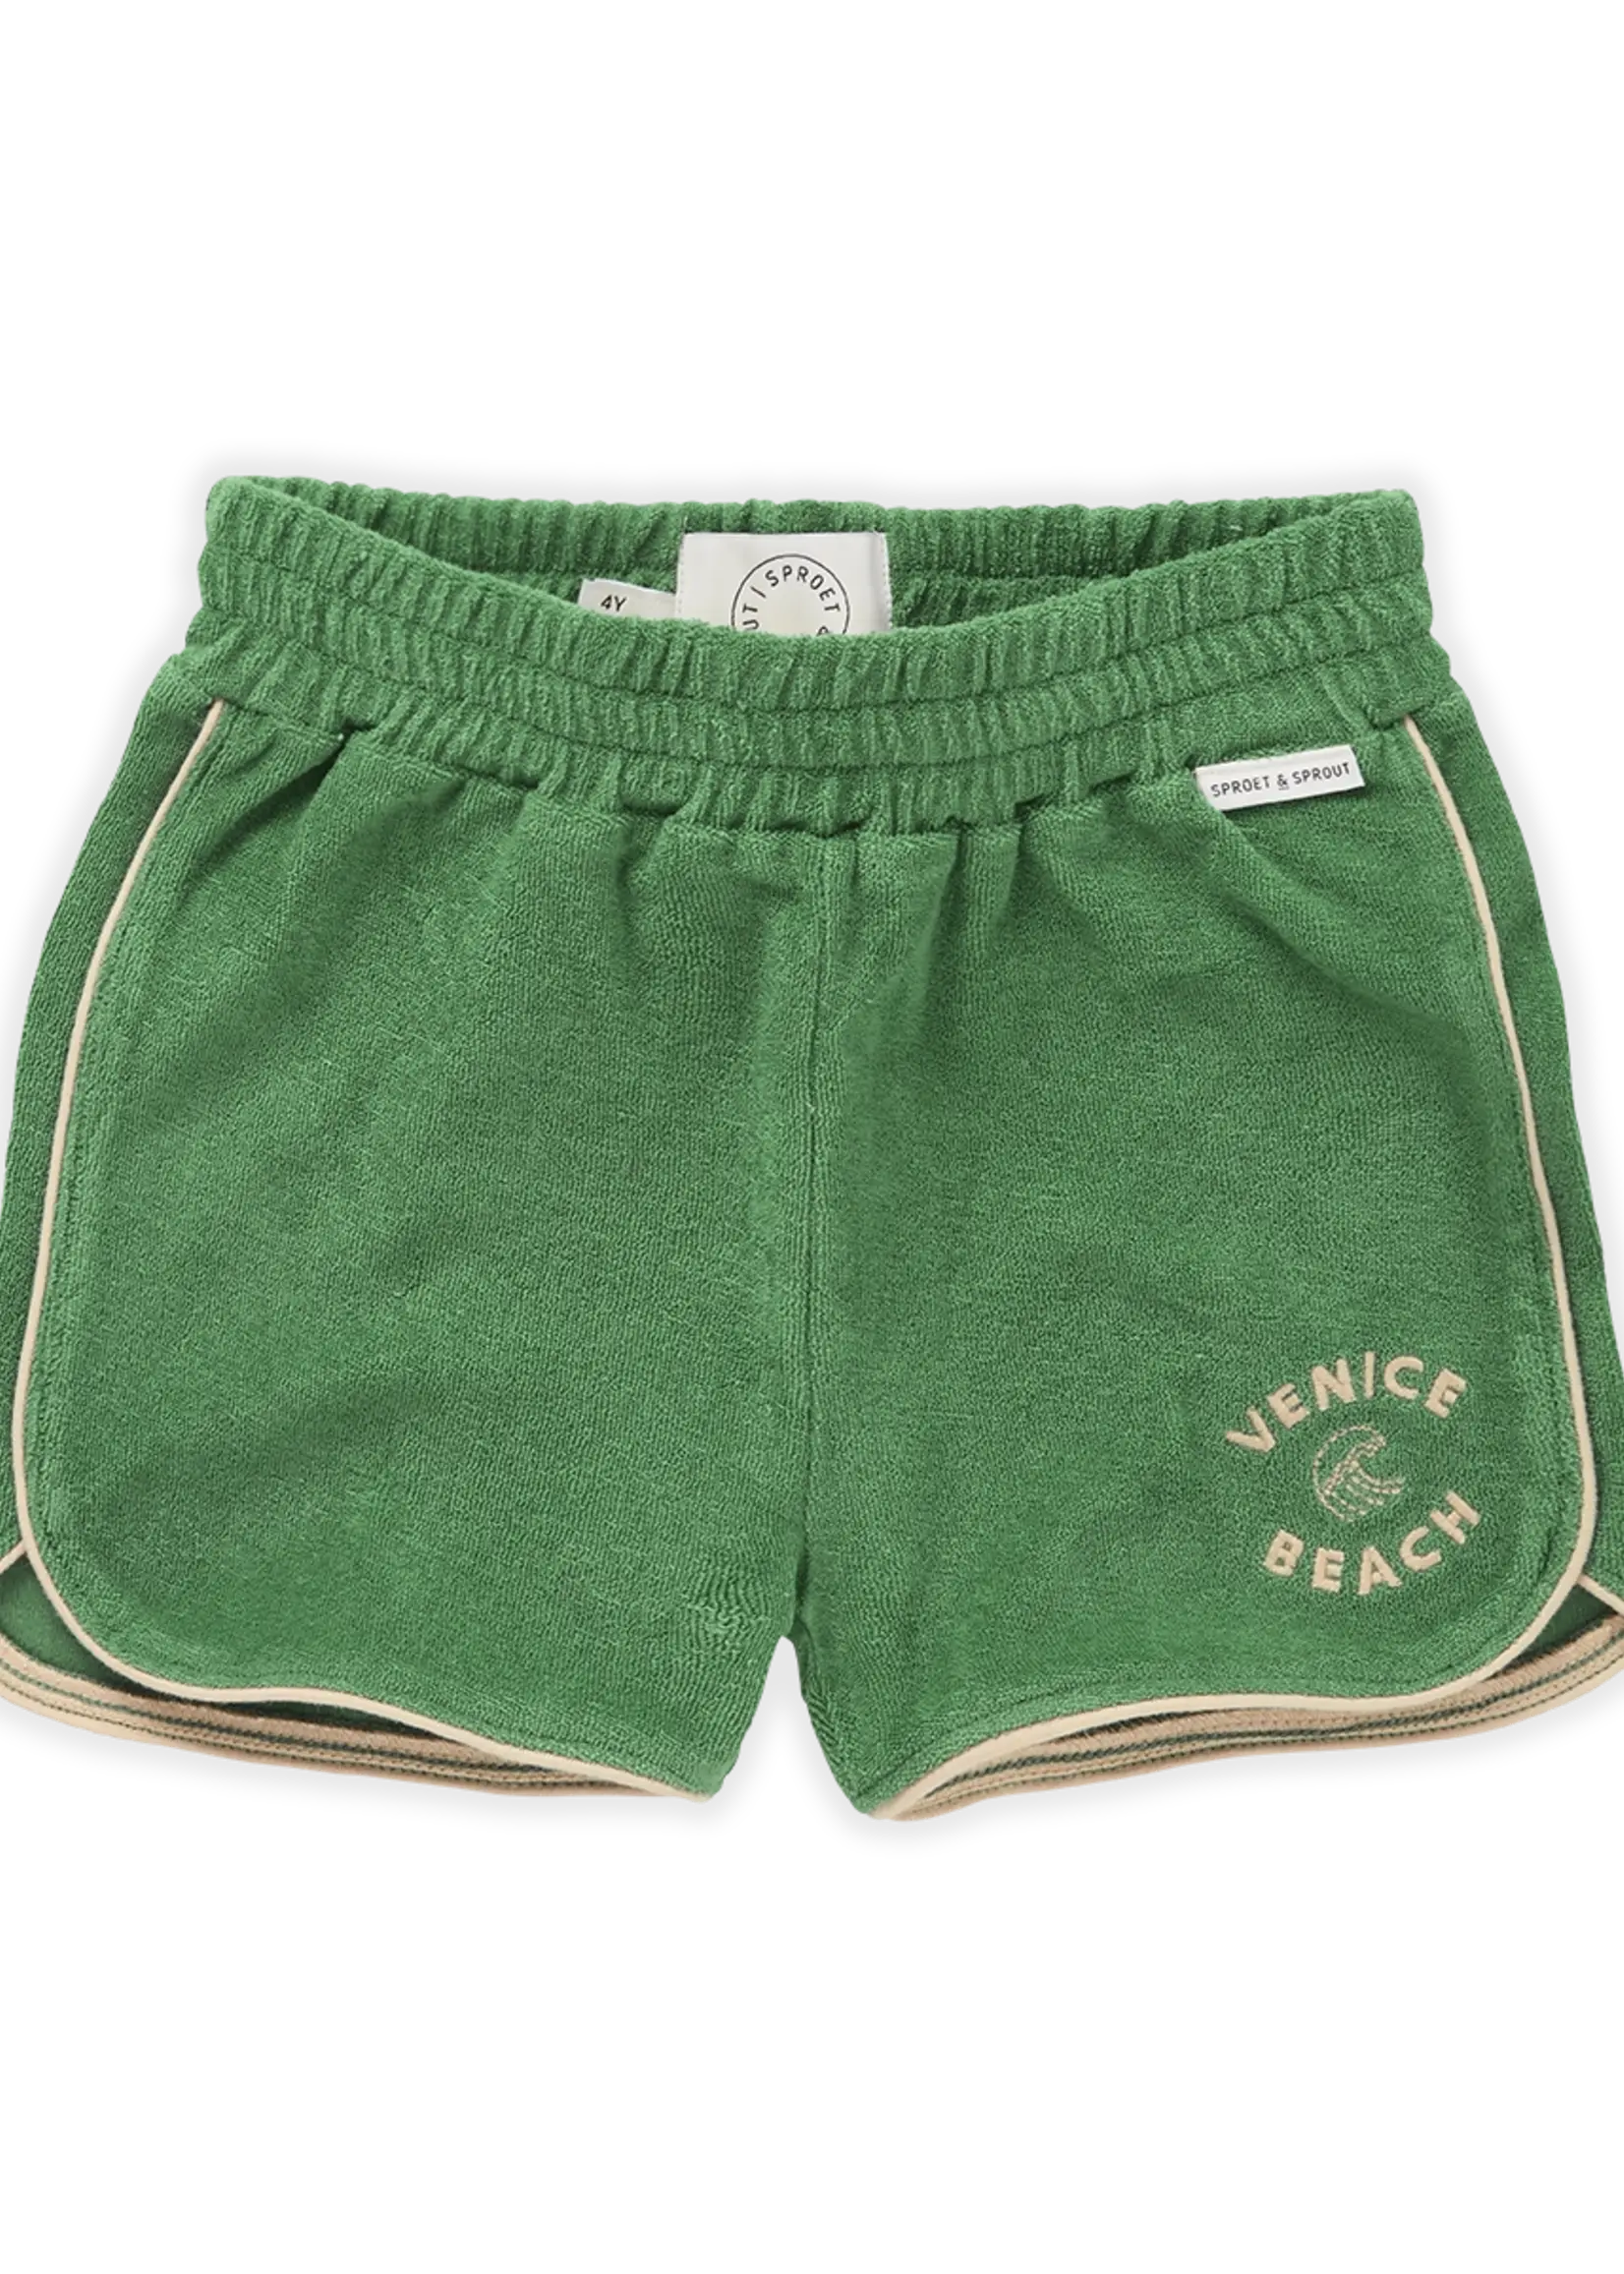 Sproet en Sprout Terry sport short mint green - Sproet & Sprout